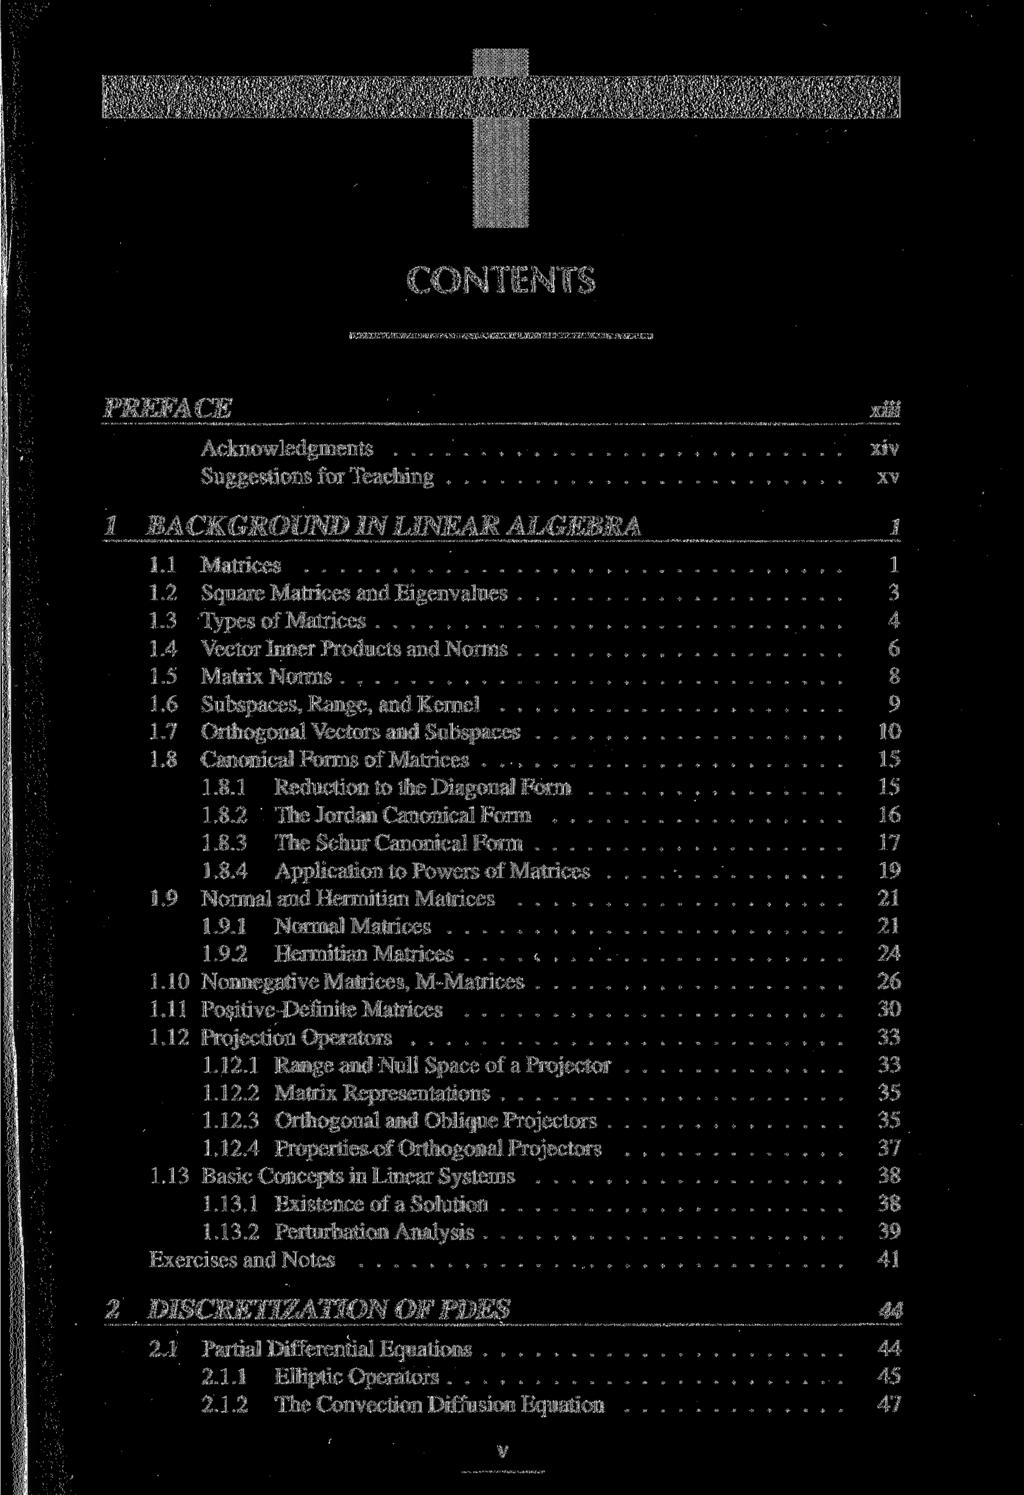 CONTENTS PREFACE Acknowledgments Suggestions for Teaching xüi xiv xv 1 BACKGROUND IN LINEAR ALGEBRA 1 1.1 Matrices 1 1.2 Square Matrices and Eigenvalues 3 1.3 Types of Matrices 4 1.